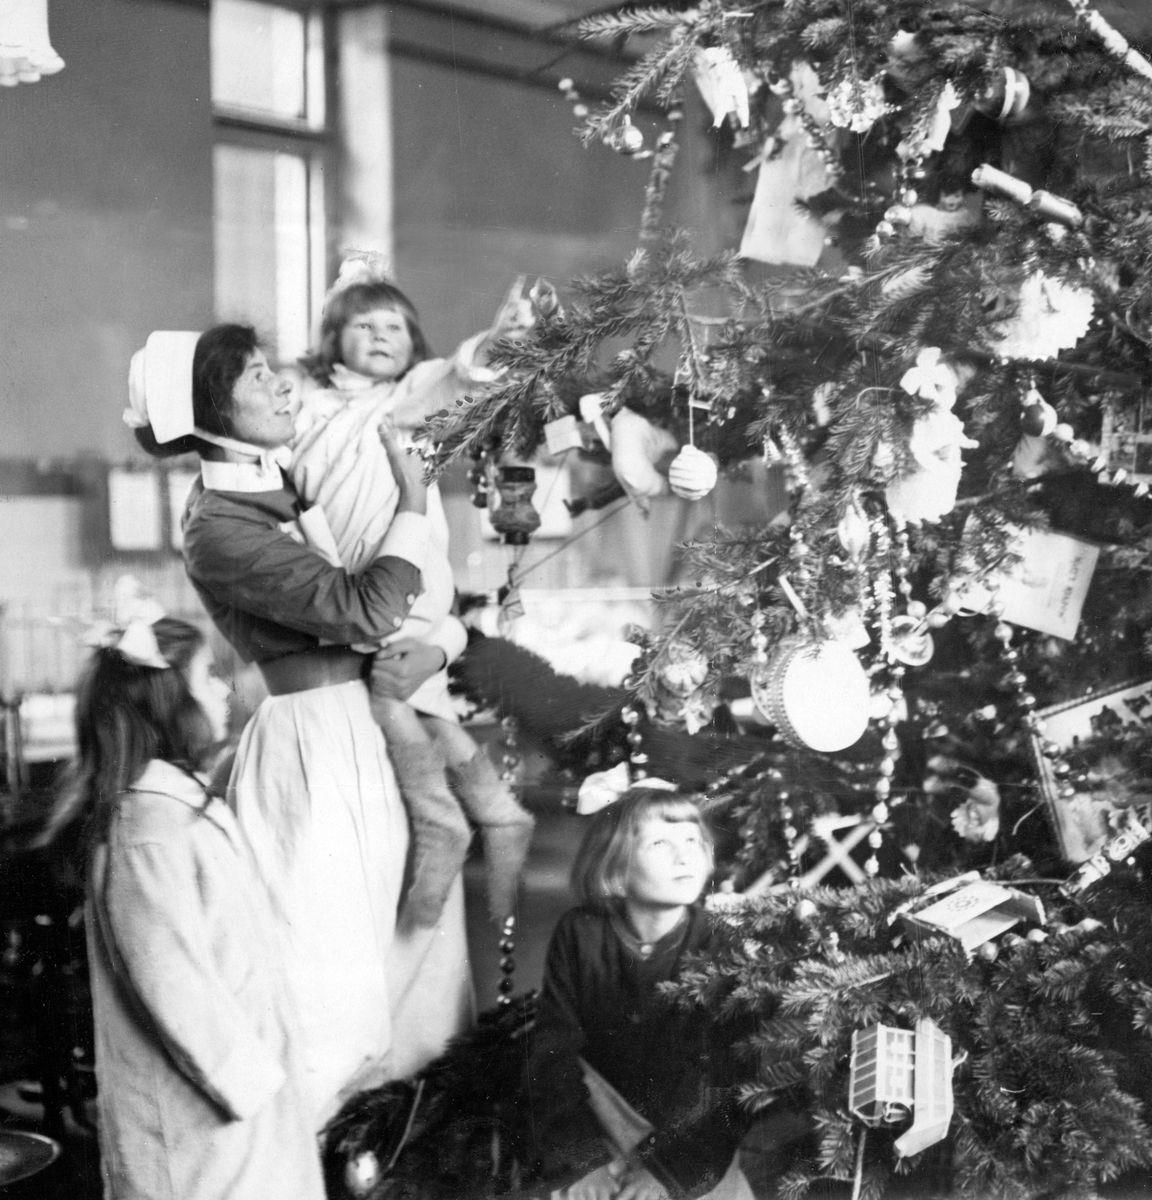 <p>With the war and the Spanish flu over, <a href="https://holidappy.com/holidays/Christmas-100-Years-Ago">Christmas in the 1920s</a> was a fun family affair. Households had more disposable income than in previous decades and could afford to indulge in the many gifts and gadgets available.</p>